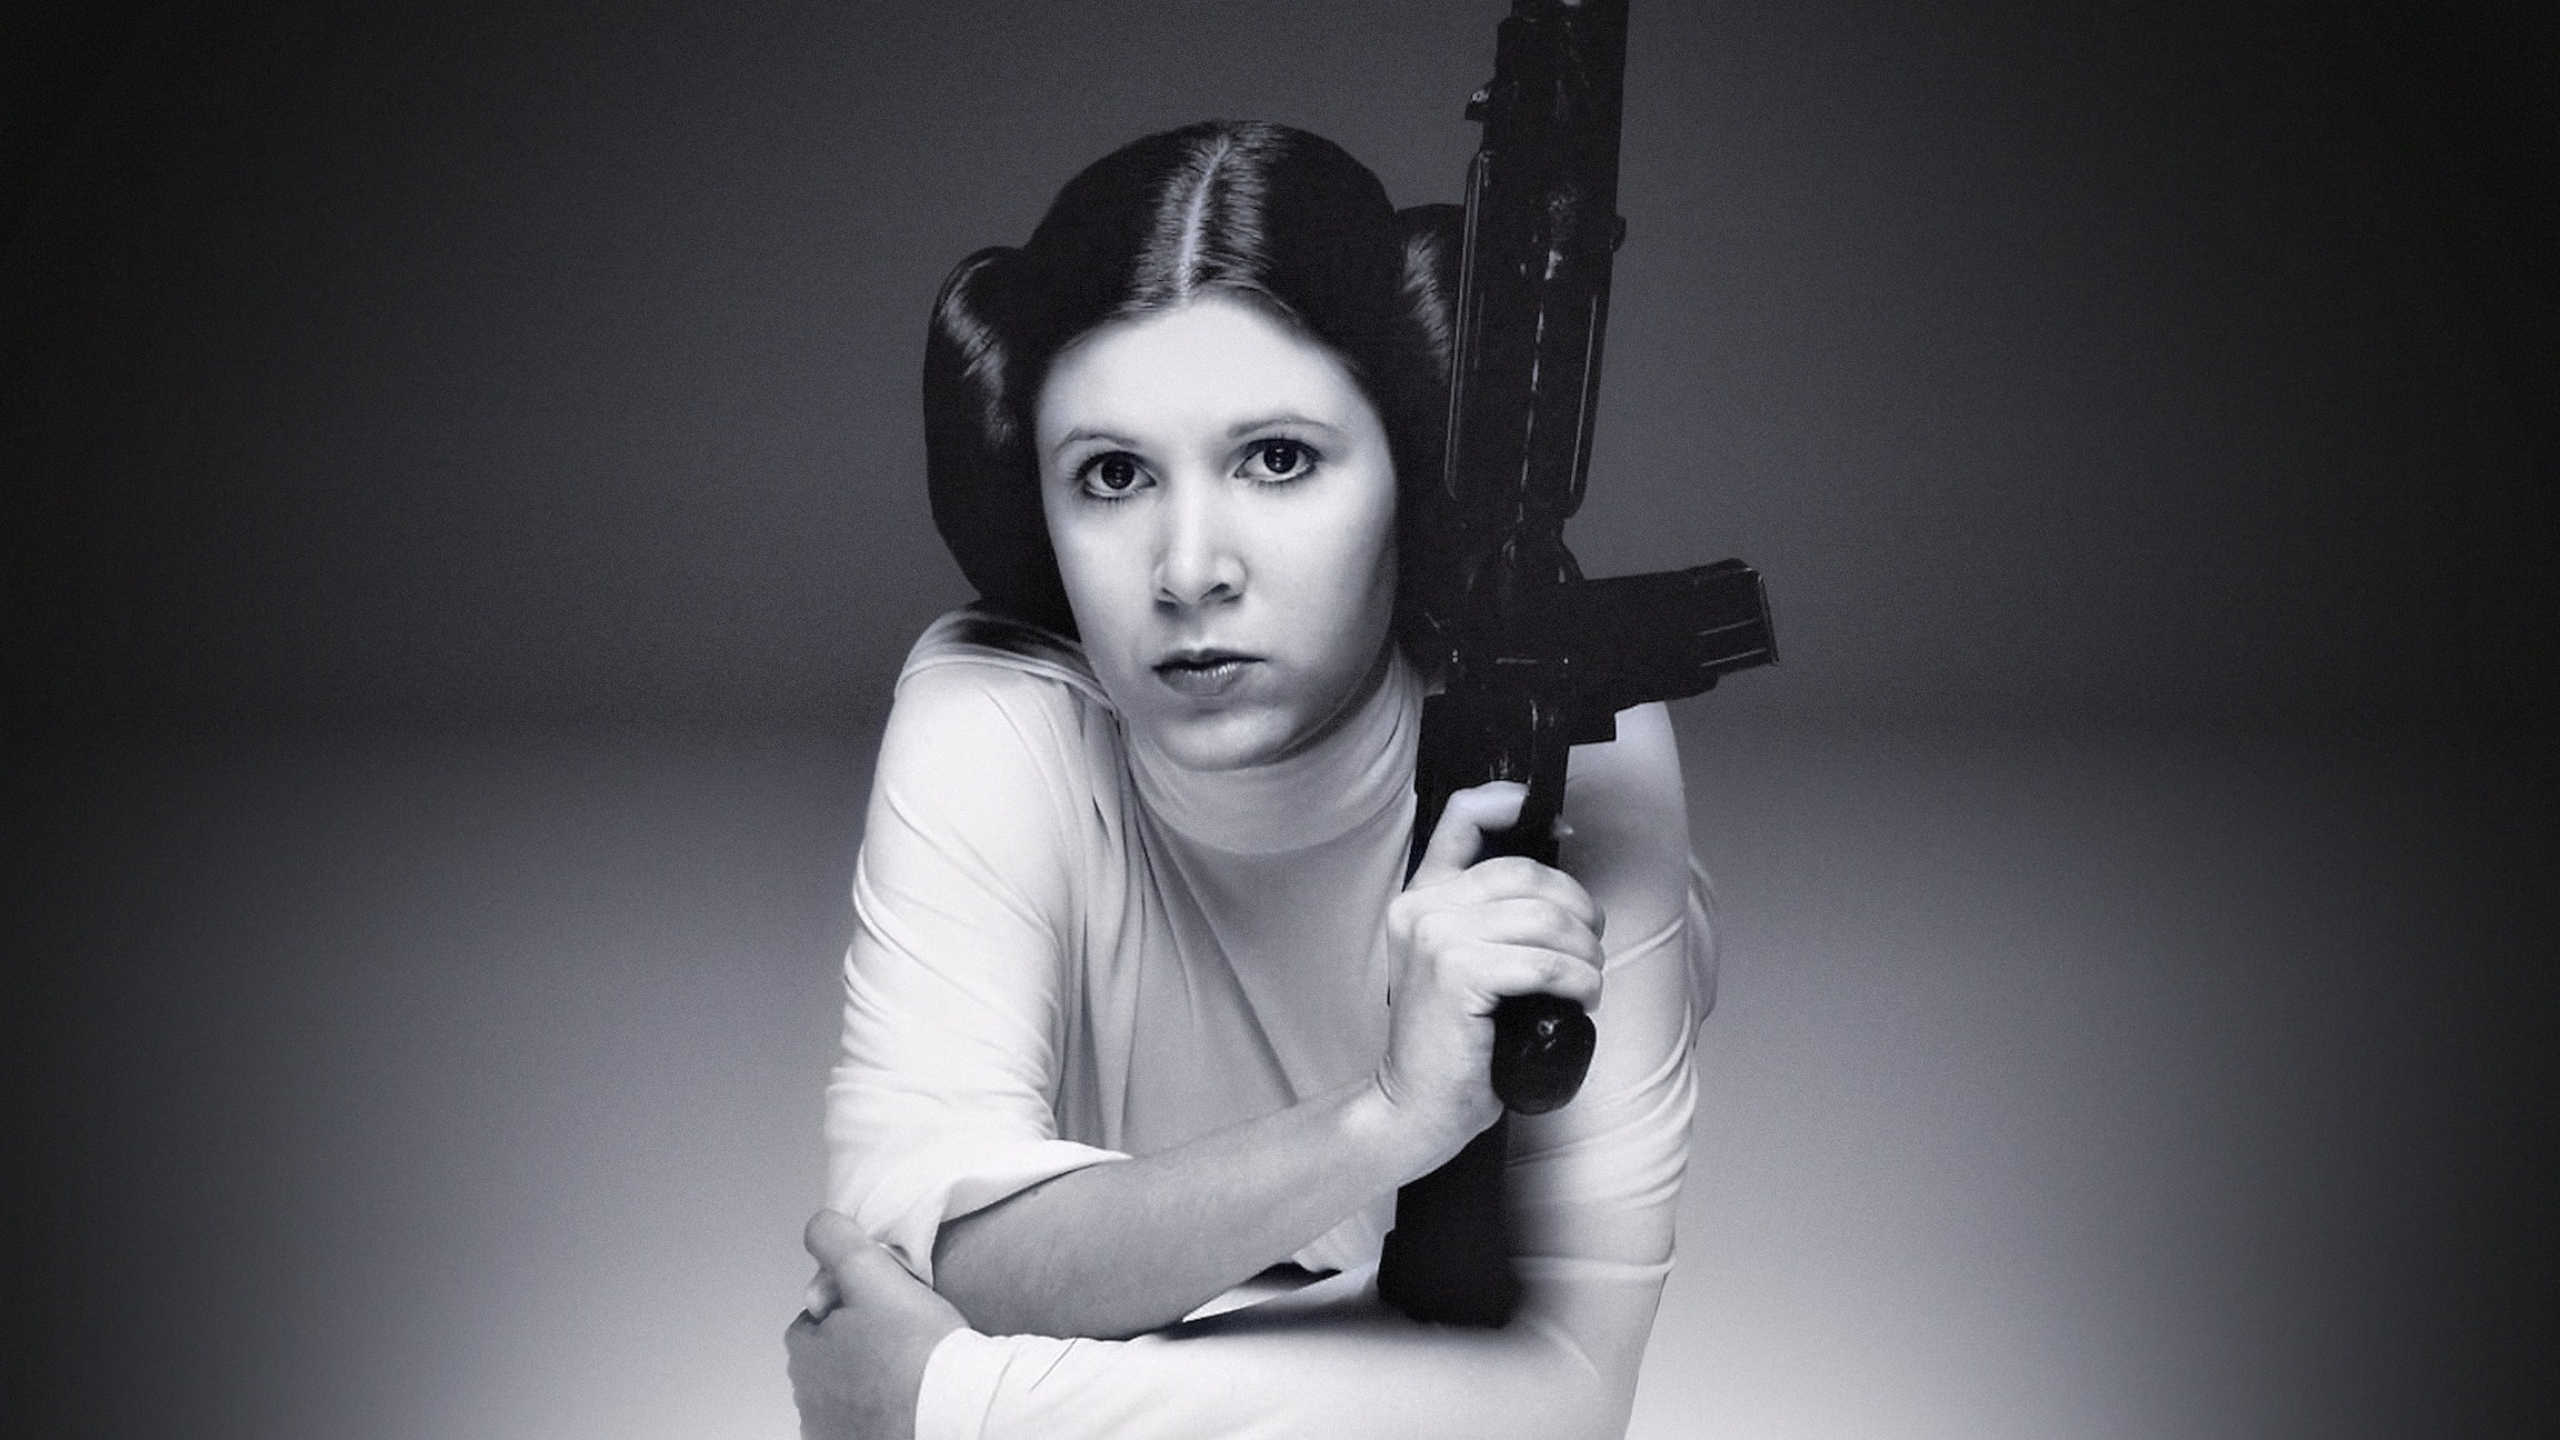 Carrie Fisher, High definition wallpapers, 2560x1440 HD Desktop